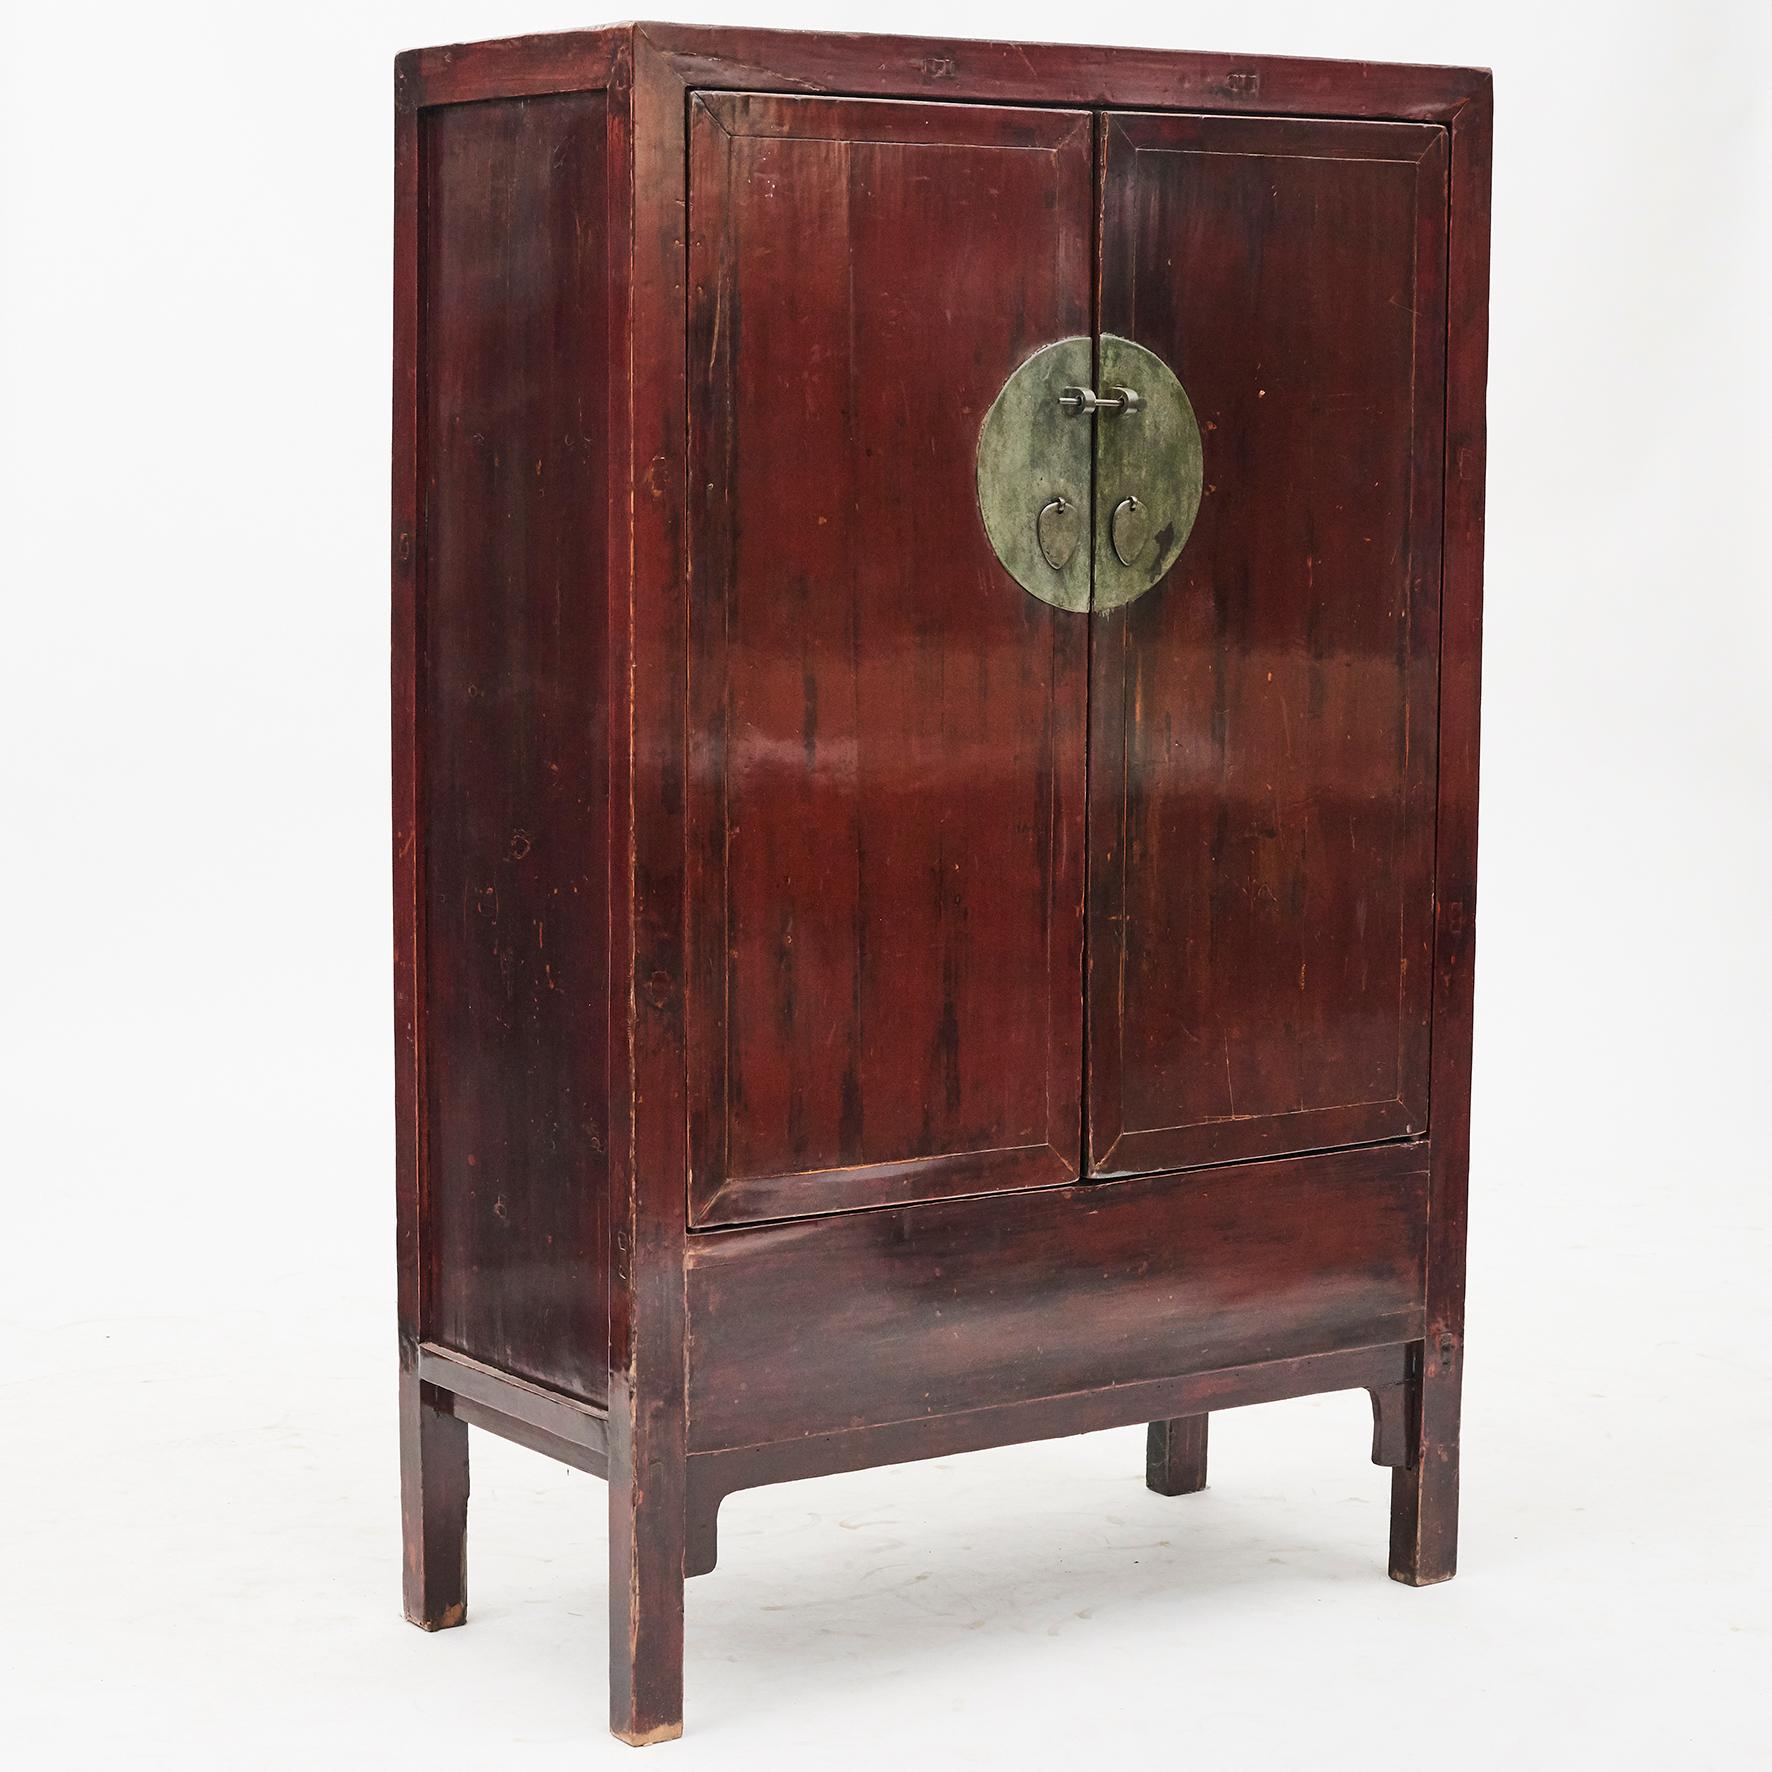 Lacquered wedding cabinet from Shanxi province, North China. Mid-19th century.
Features two doors, beautifully accented with a circular brass face plate.
Inside with shelves and drawers. Original red lacquer, beautiful patina.